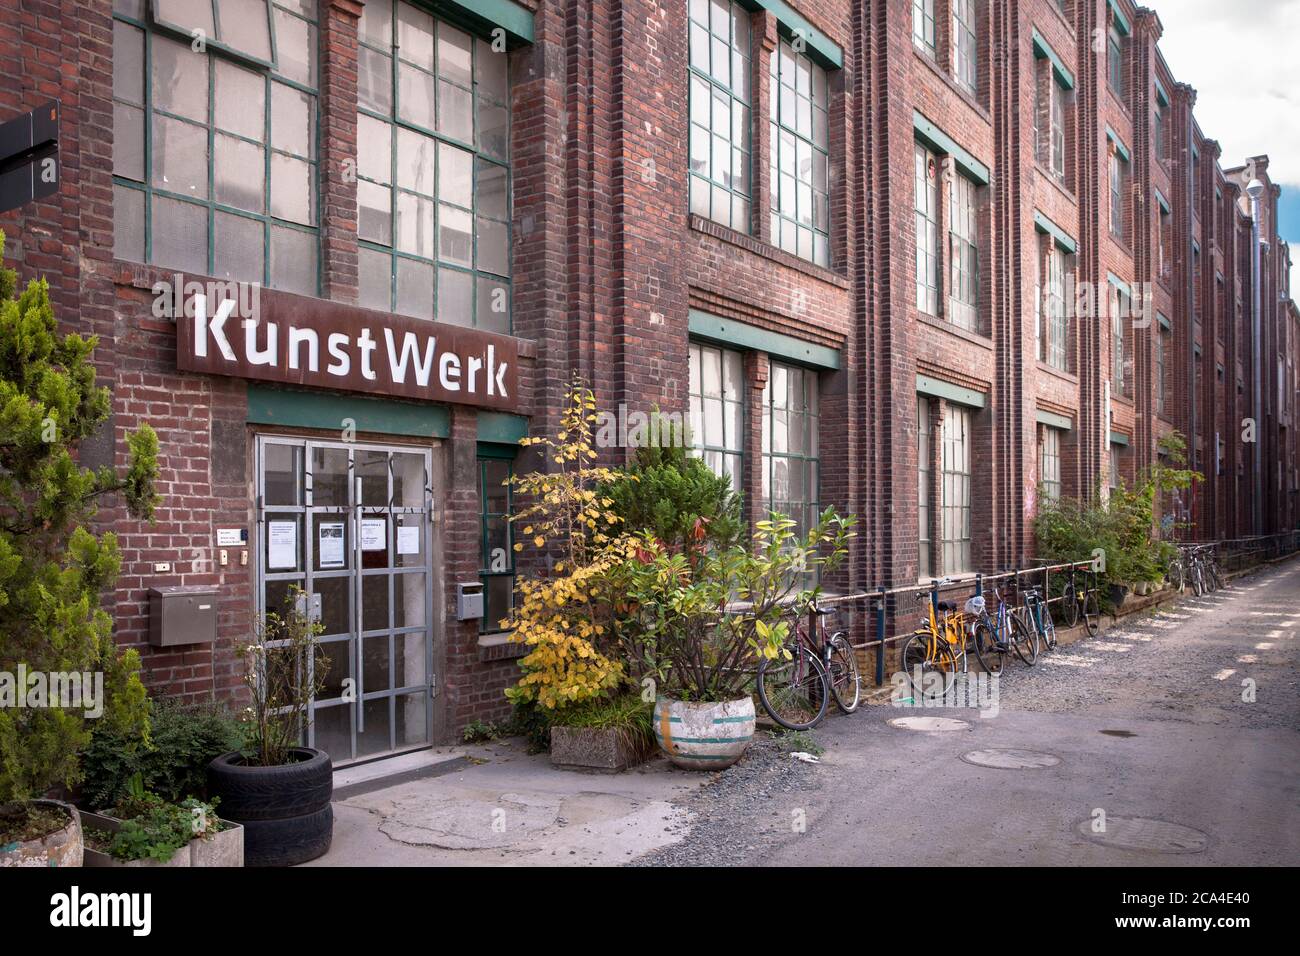 the studio house KUNSTWERK in Deutz, Germany's largest self-administered artists' house, Cologne, Germany.  das Atelierhaus KUNSTWERK in Deutz,  Deuts Stock Photo